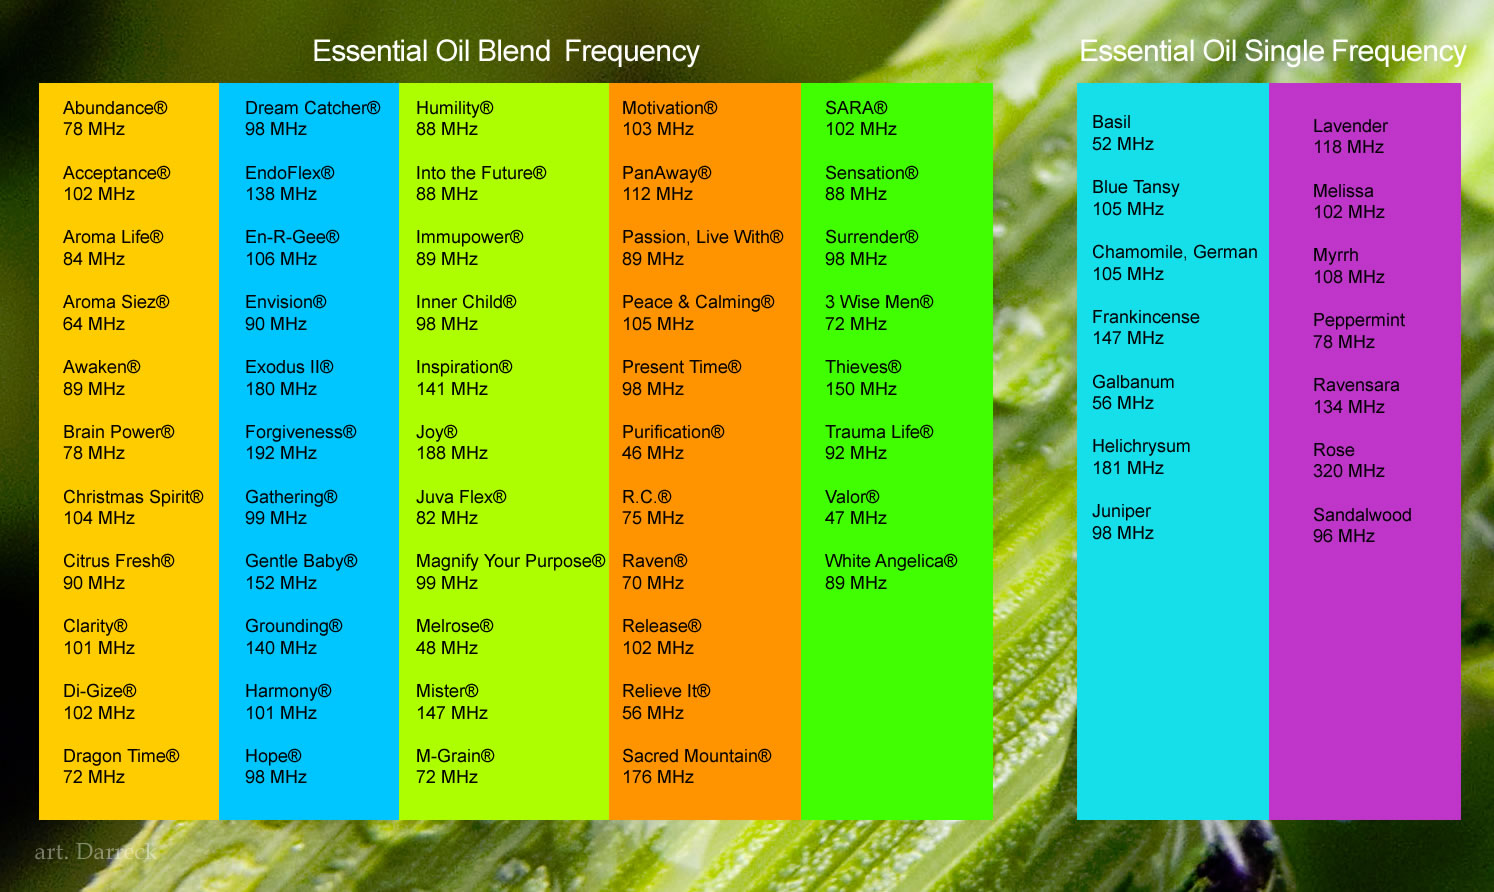 Body Frequency Chart